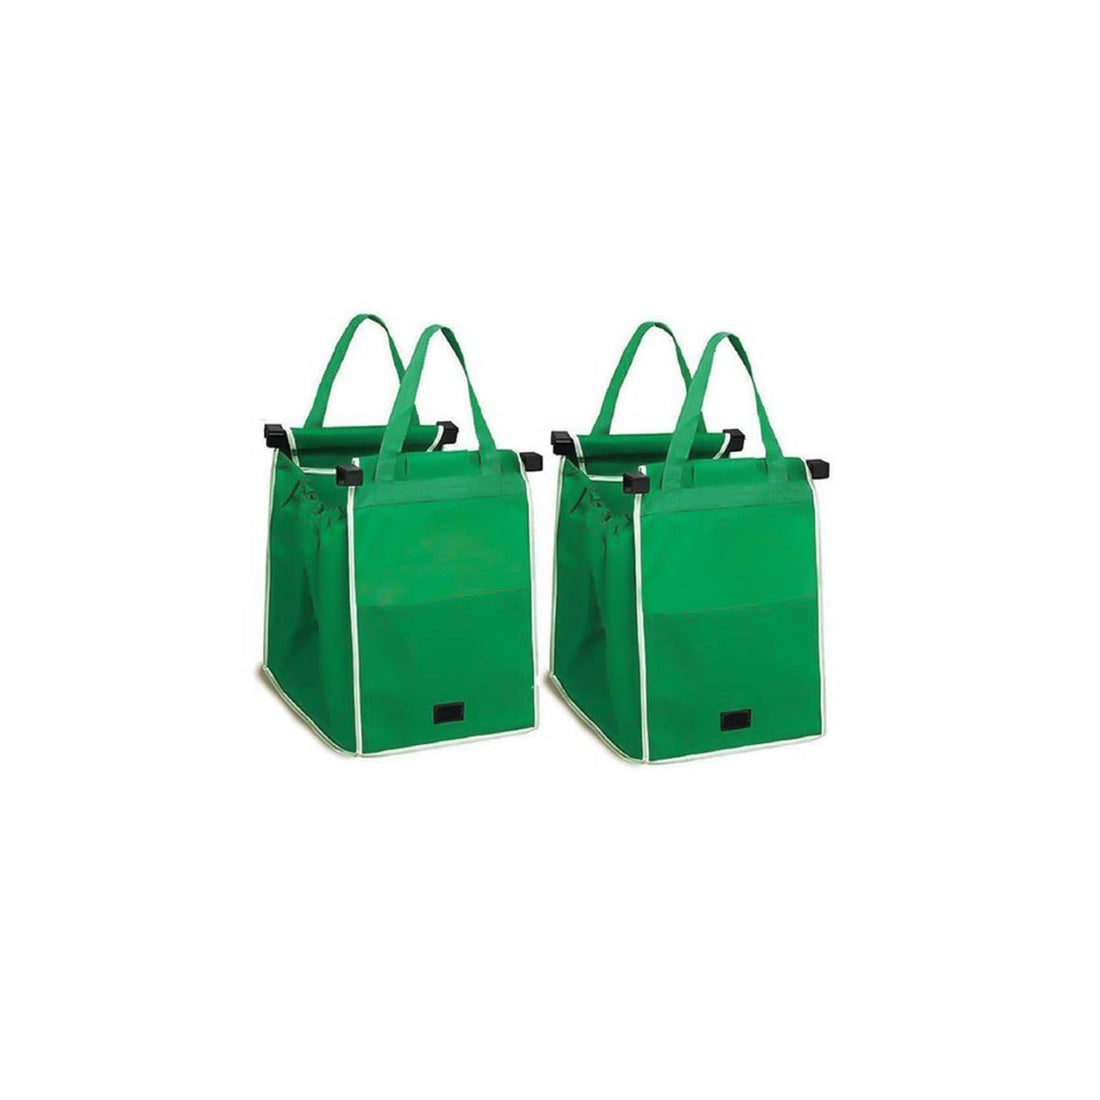 Reusable Clip-to-Cart Grocery Bag - 2 Pack